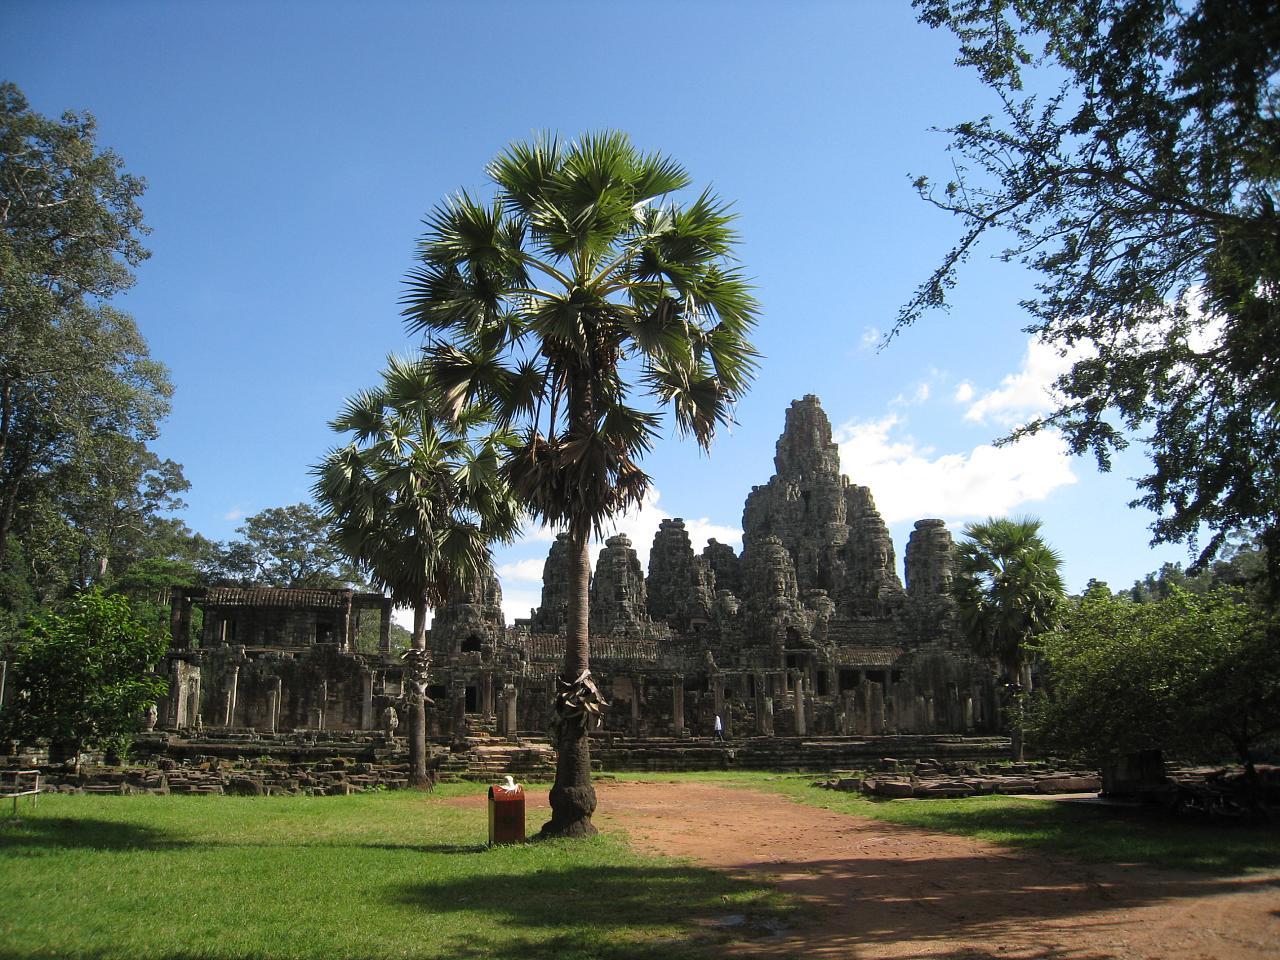 The many faces of Bayon temple.